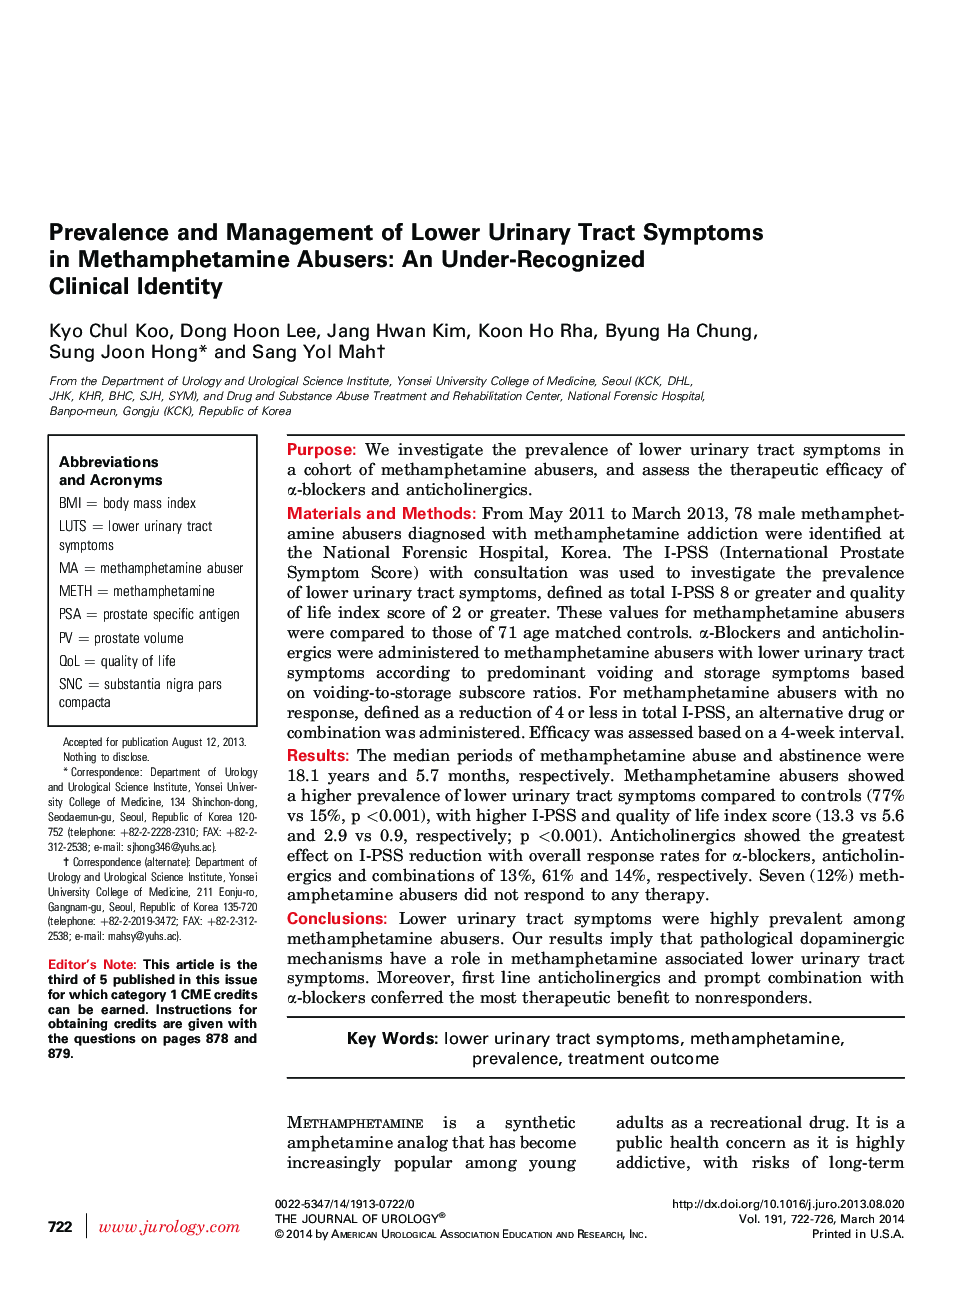 Prevalence and Management of Lower Urinary Tract Symptoms in Methamphetamine Abusers: An Under-Recognized Clinical Identity 